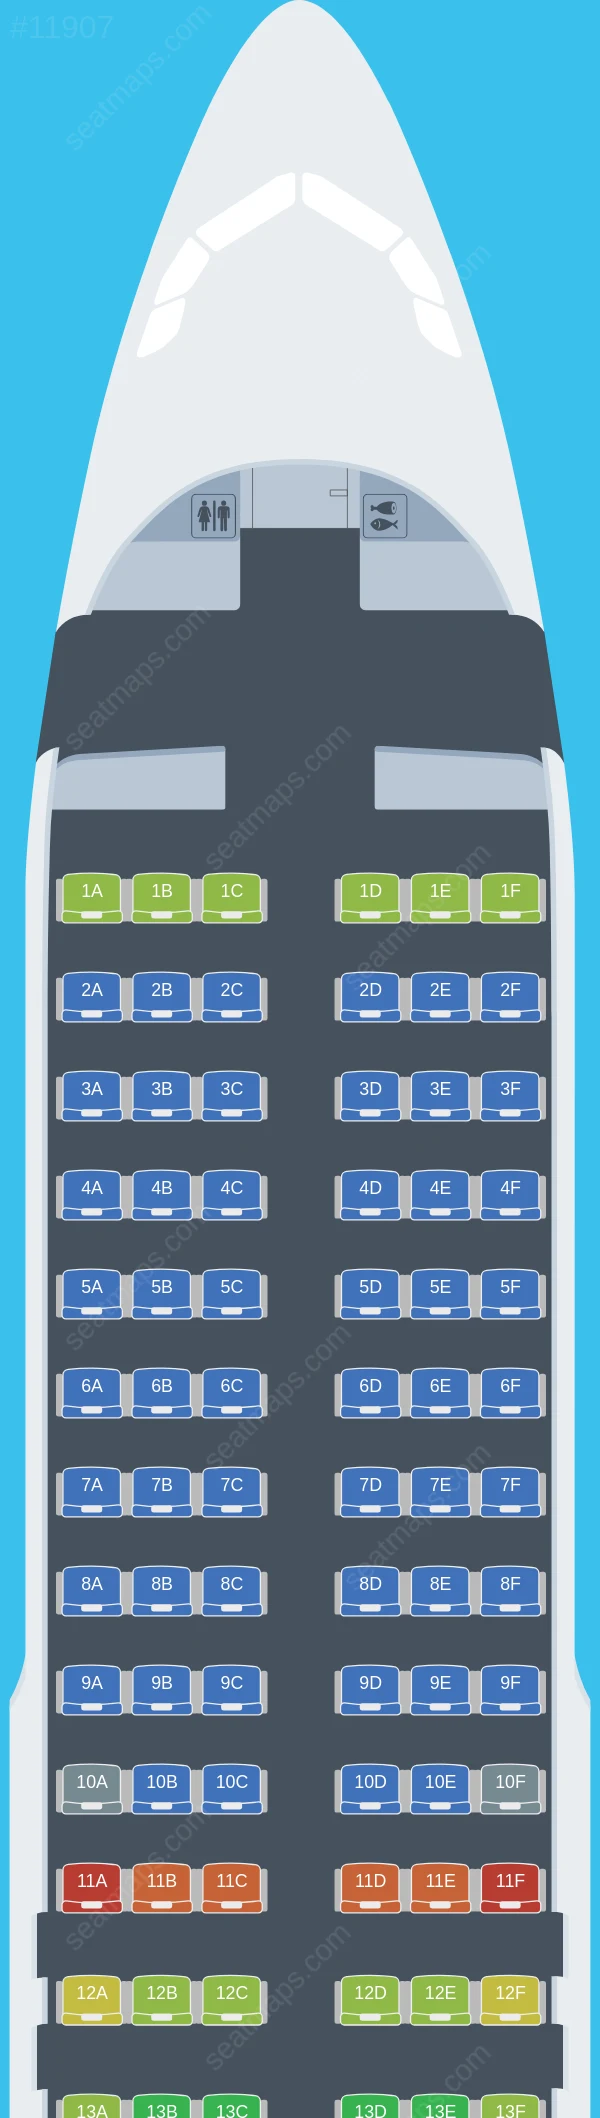 FlyArystan Airbus A320-200 seatmap preview